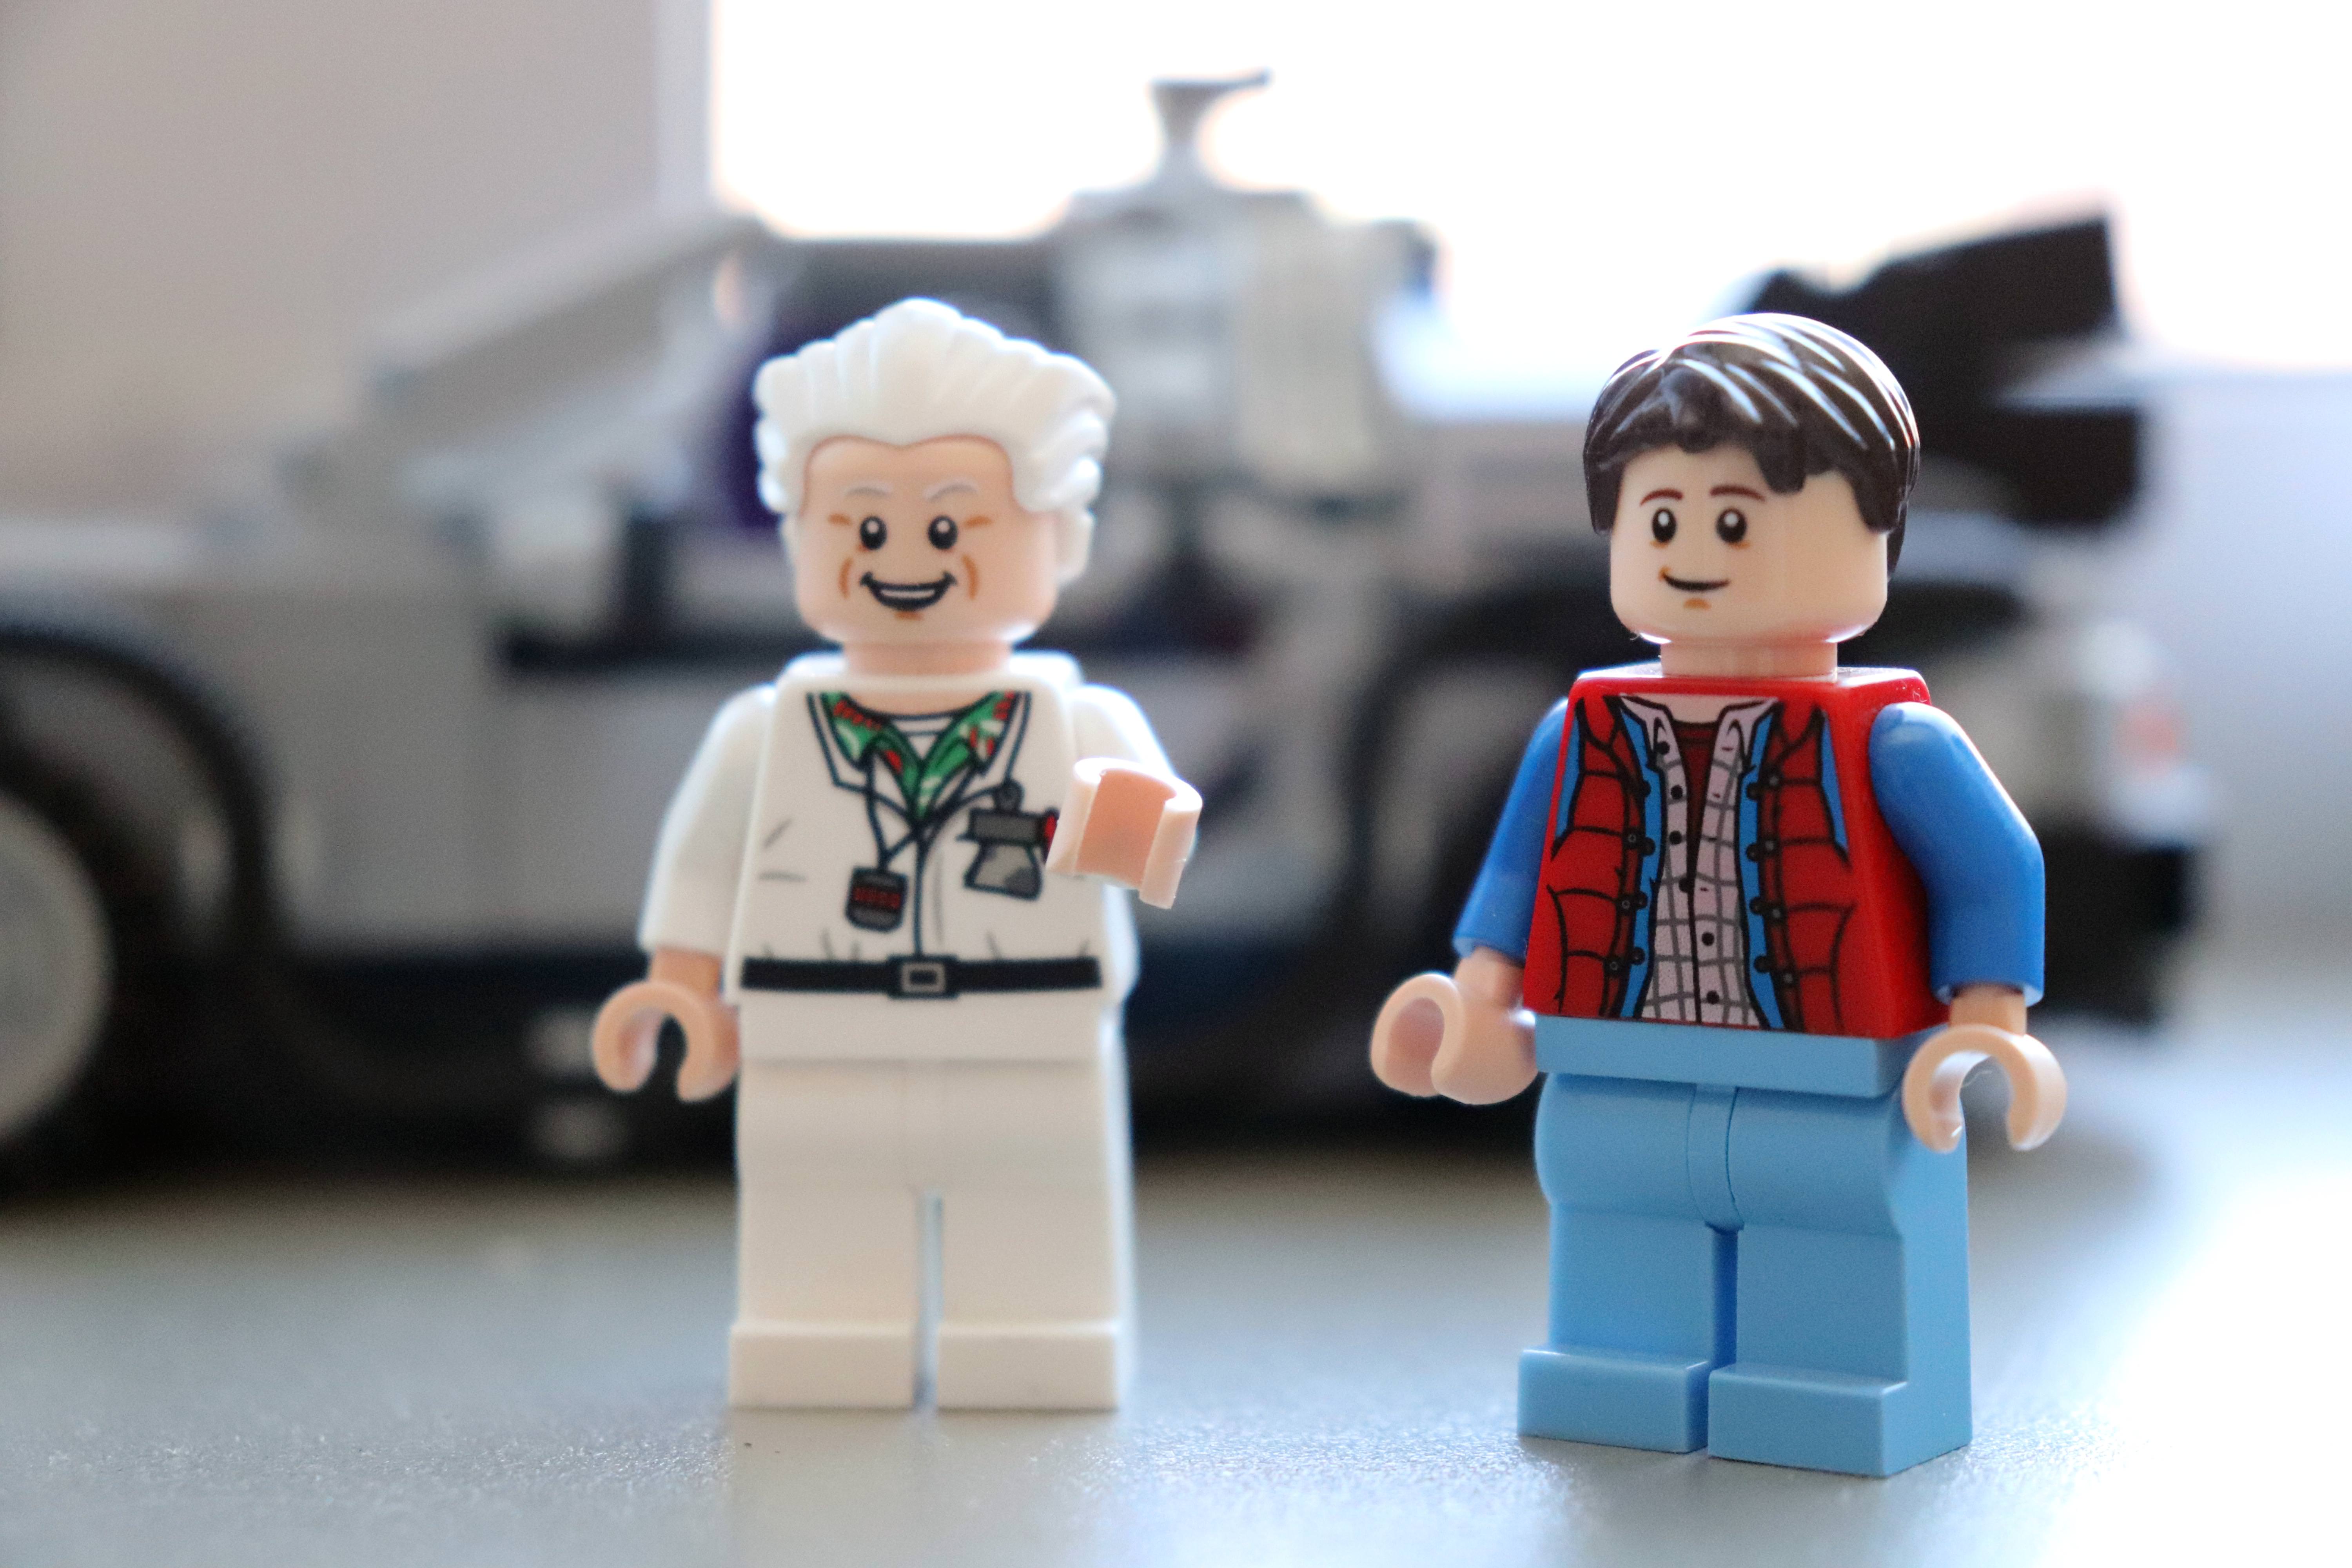 Doc Brown and Marty McFly Lego Figurines